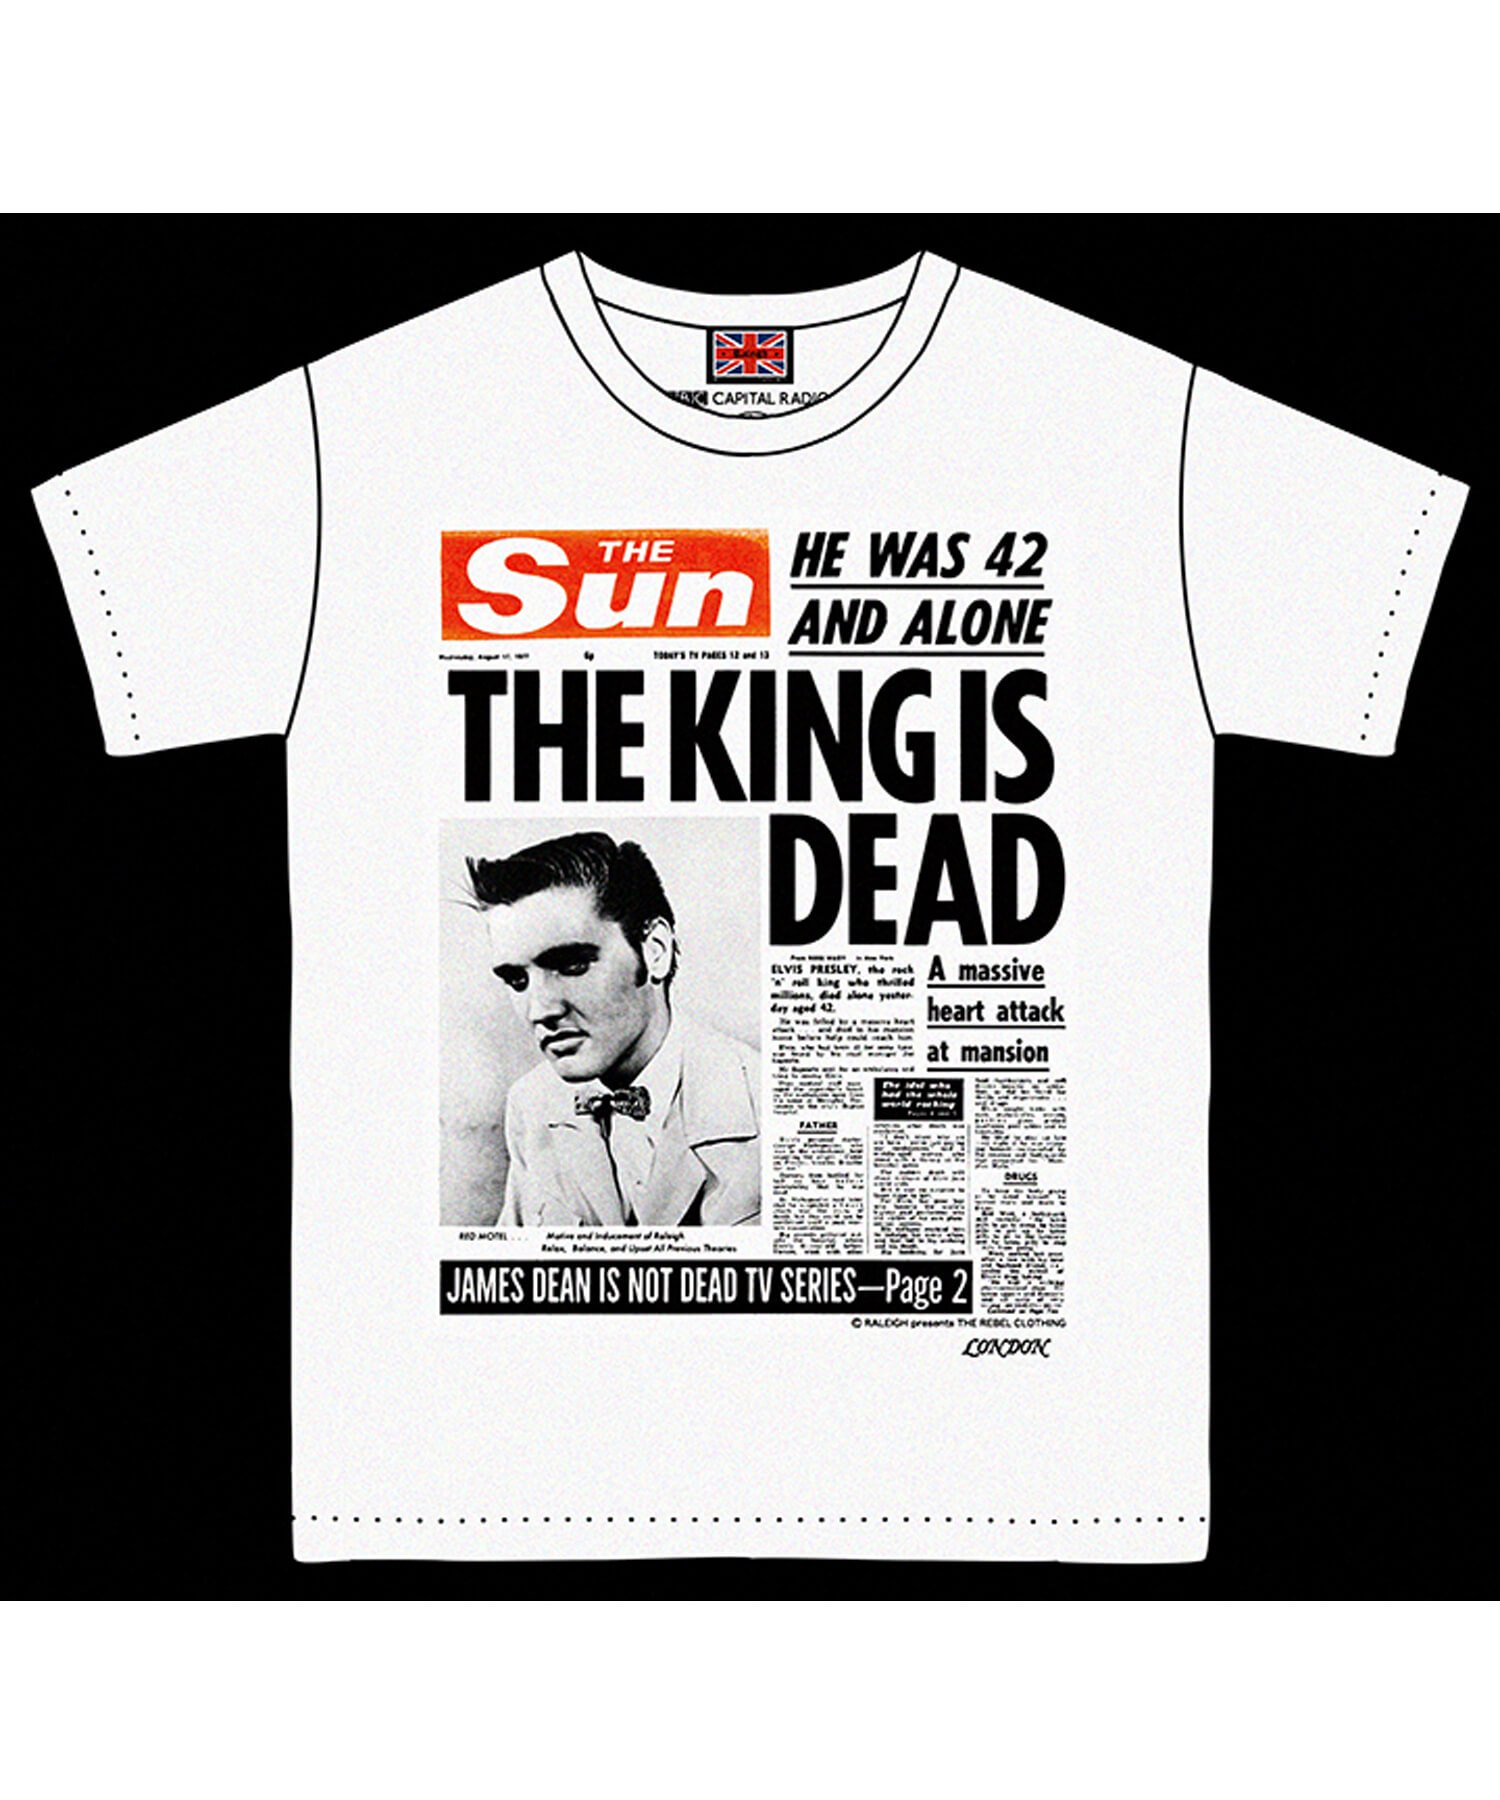 RALEIGH / ラリー（RED MOTEL / レッドモーテル） ｜ Obituary in a Newspaper ”THE KING IS DEAD” T-SHIRTS (WH)　商品画像9